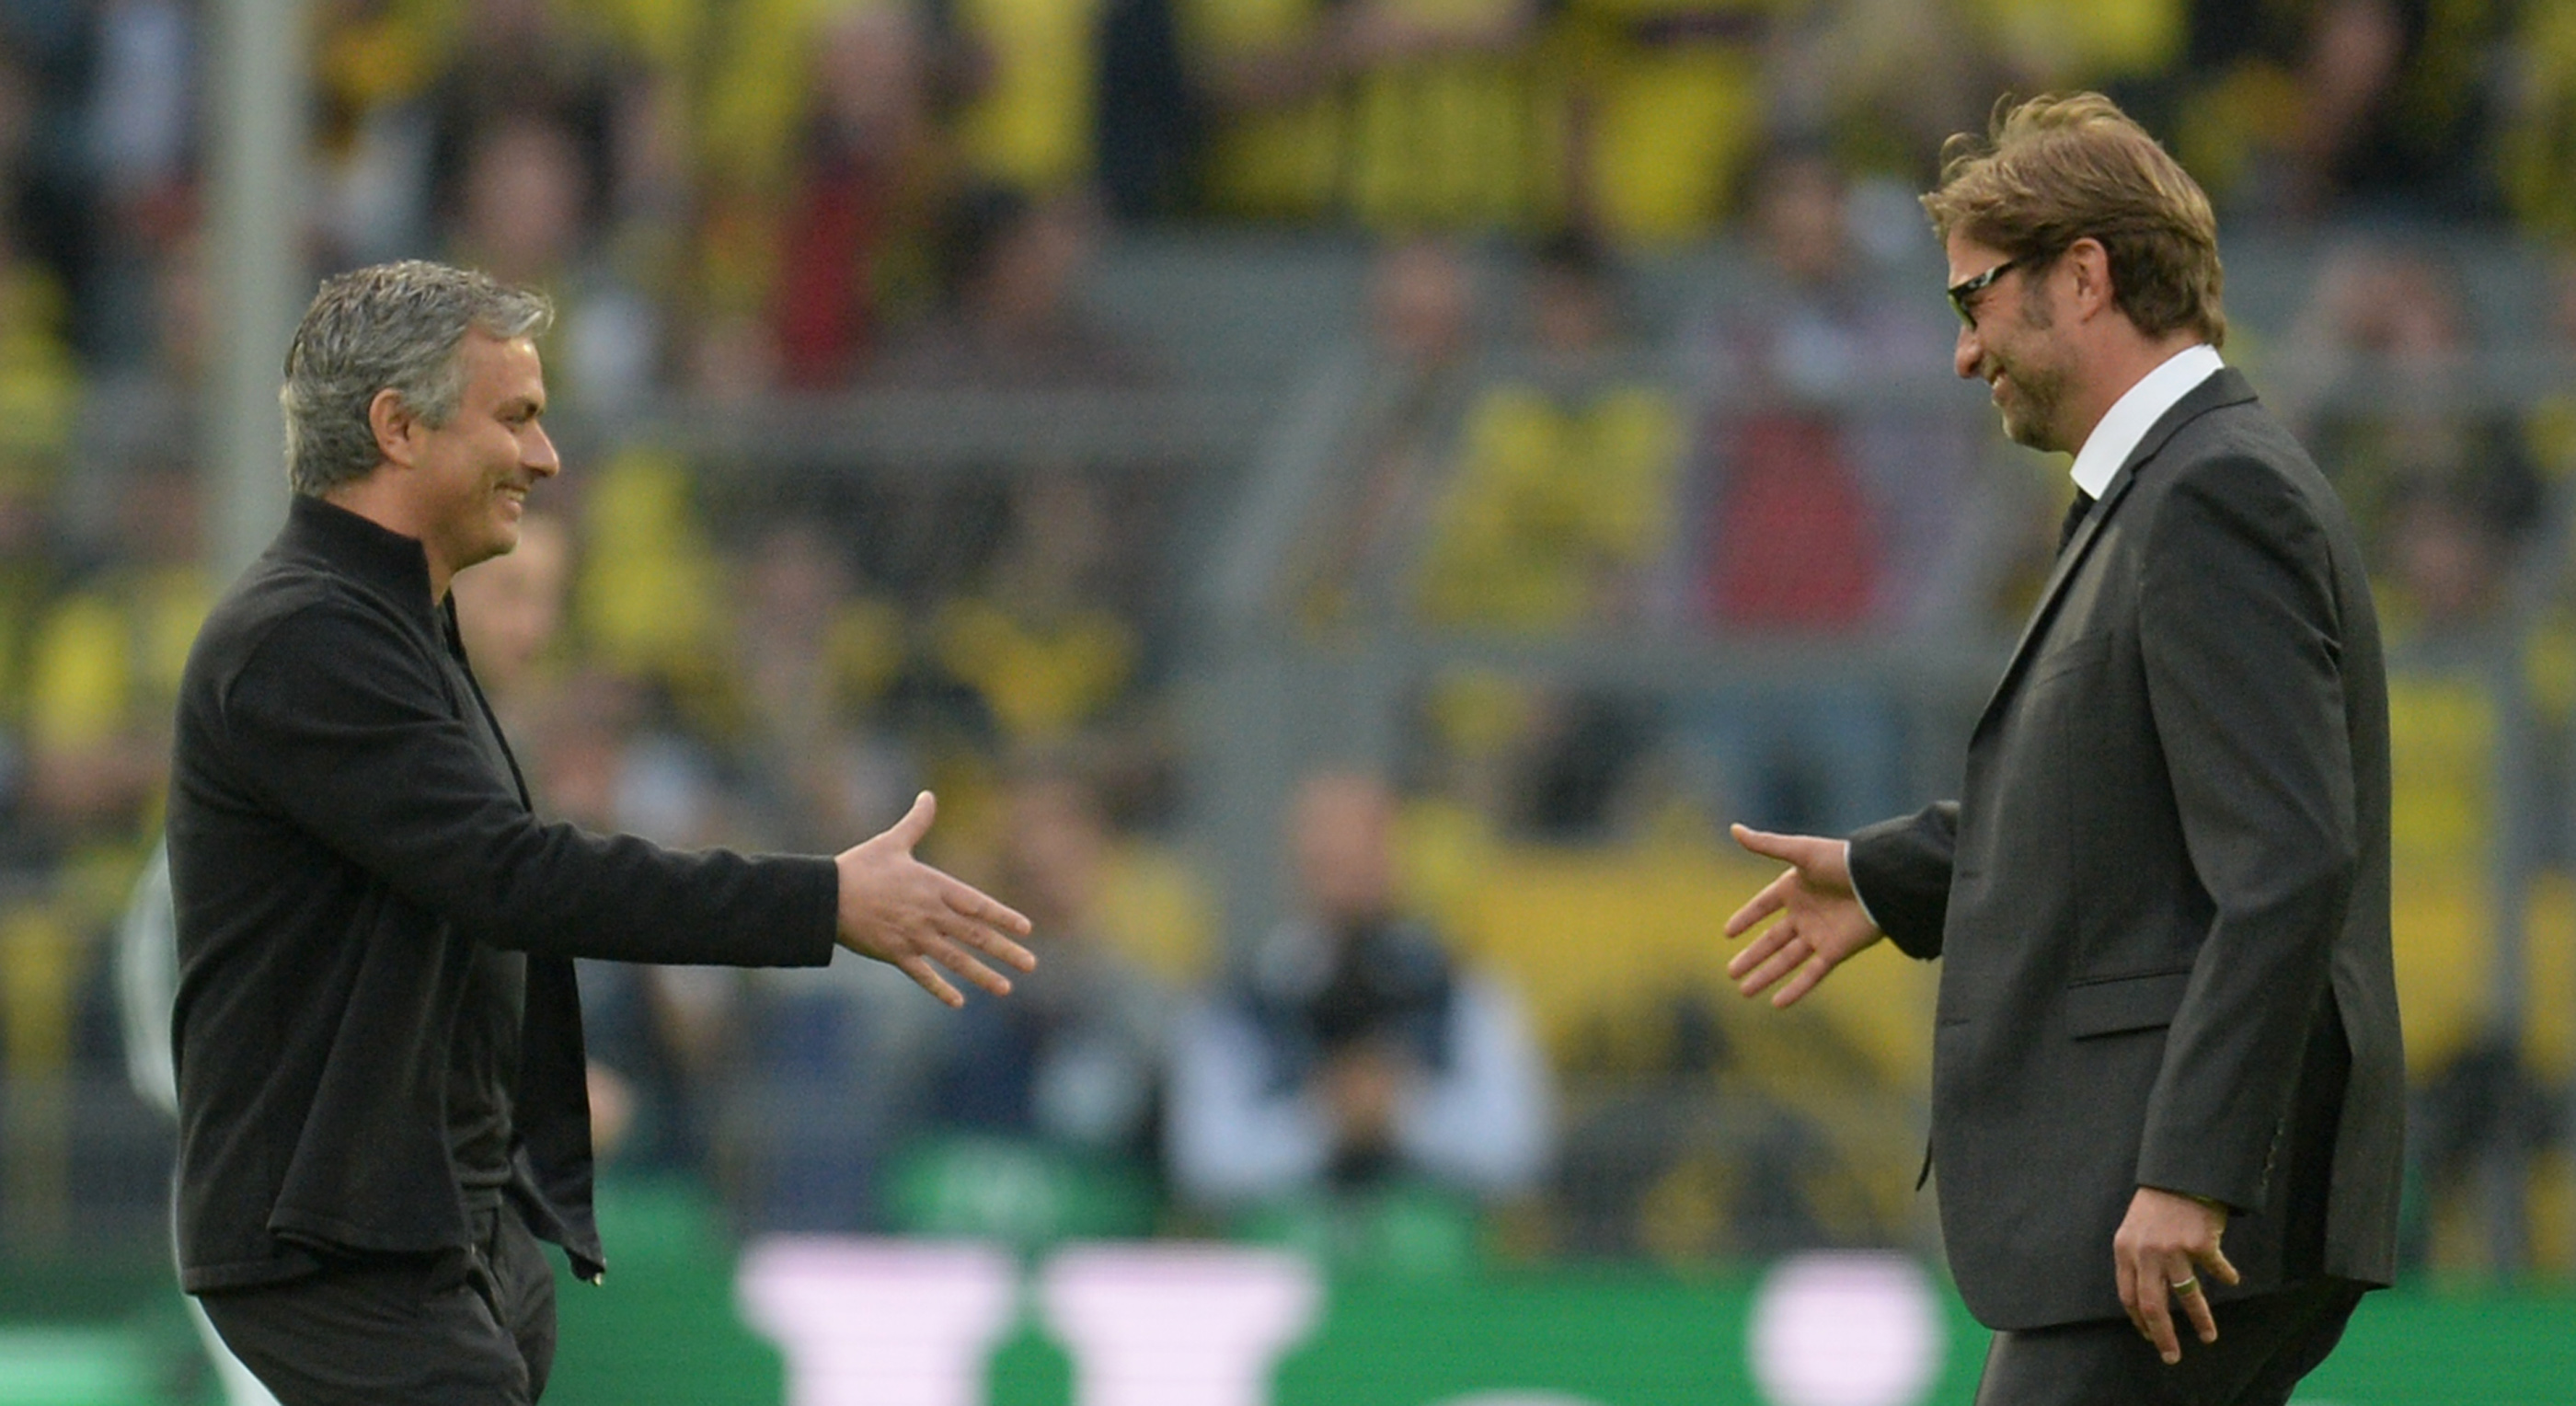 Dortmund's head coach Juergen Klopp (R) shakes hands with Real Madrid's Portuguese coach Jose Mourinho prior to the UEFA Champions League semi final first leg football match between Borussia Dortmund and Real Madrid on April 24, 2013 in Dortmund, western Germany.       (Photo credit: Patrik Stollarz/AFP/Getty Images)